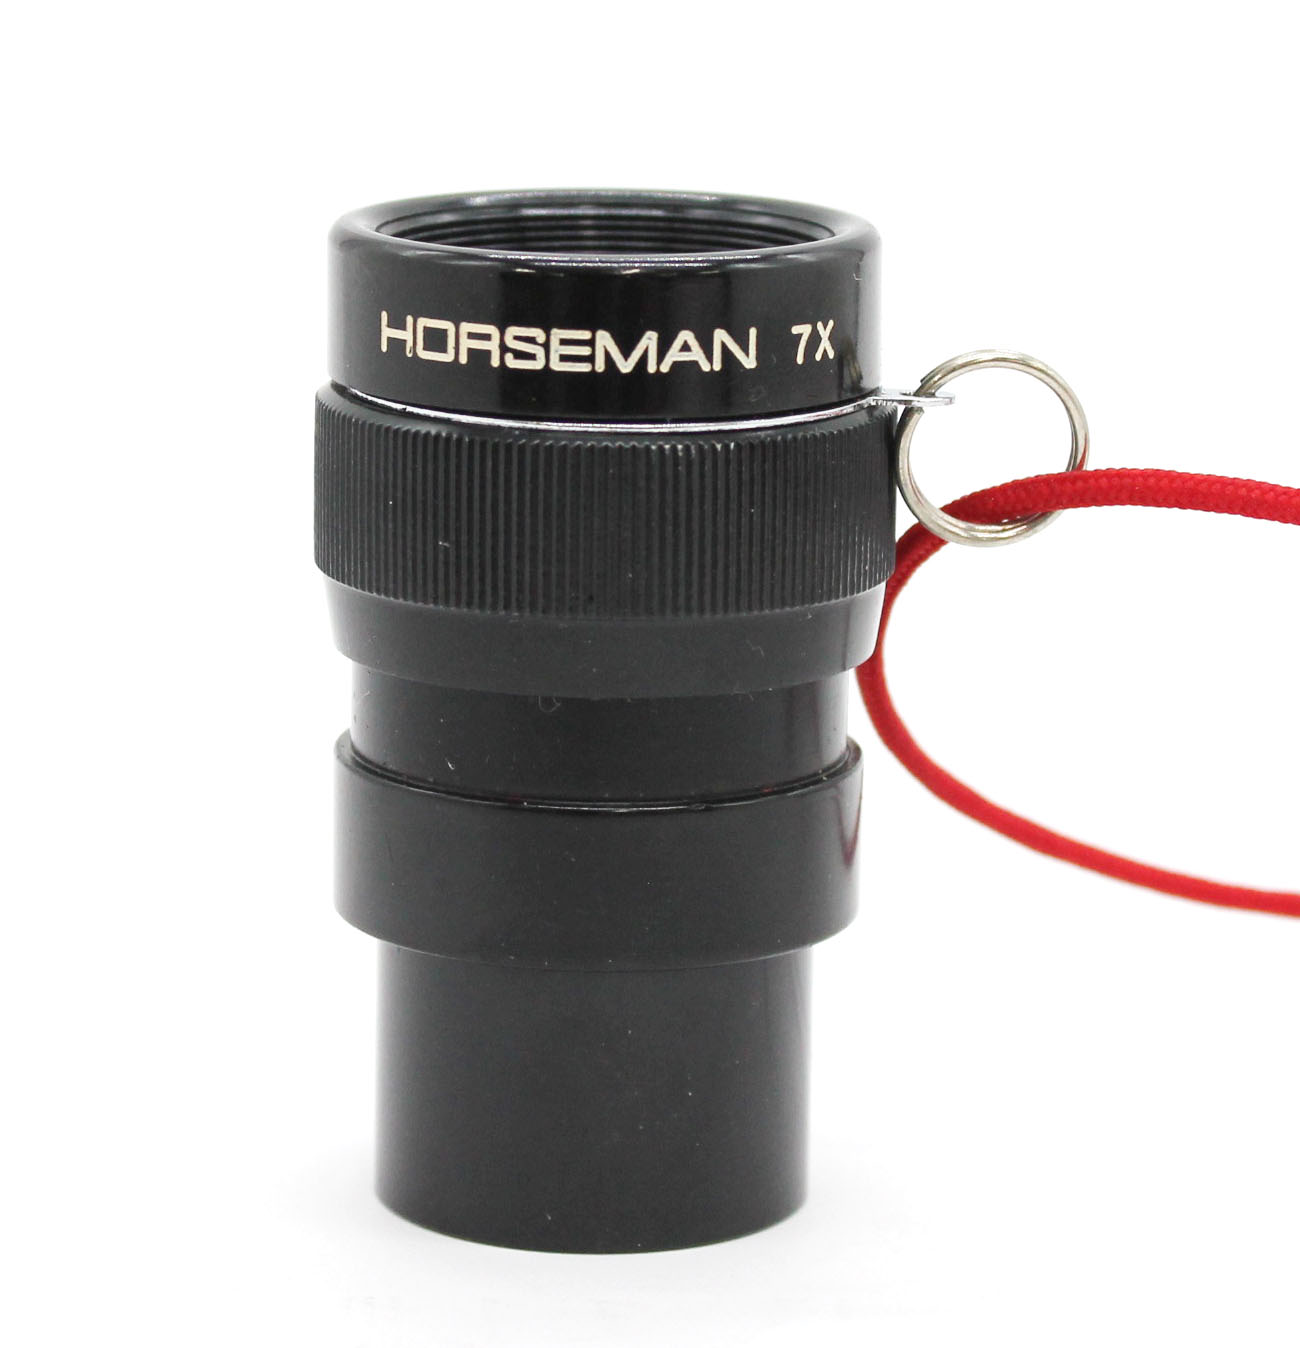 Horseman Focusing Magnifier Glass Loupe Lupe 7x in Case for Large Format Camera from Japan Photo 4